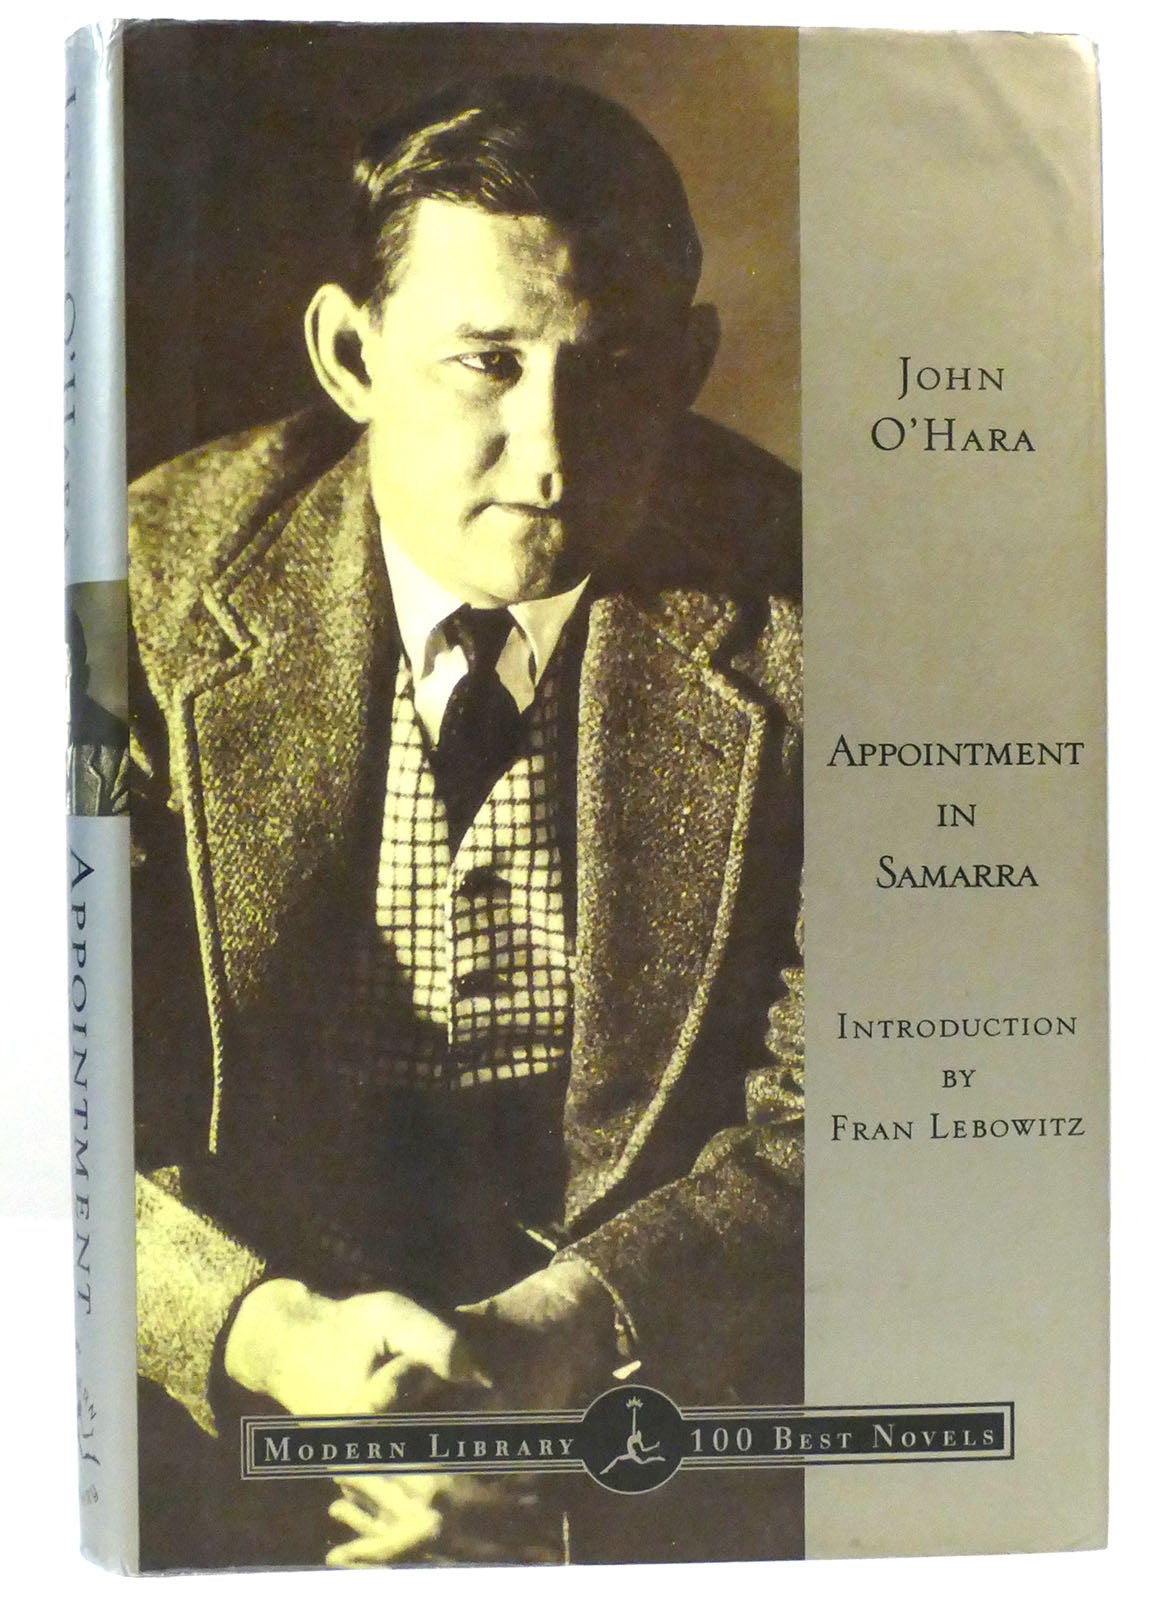 APPOINTMENT IN SAMARRA Modern Library | John O'Hara | First Edition ...